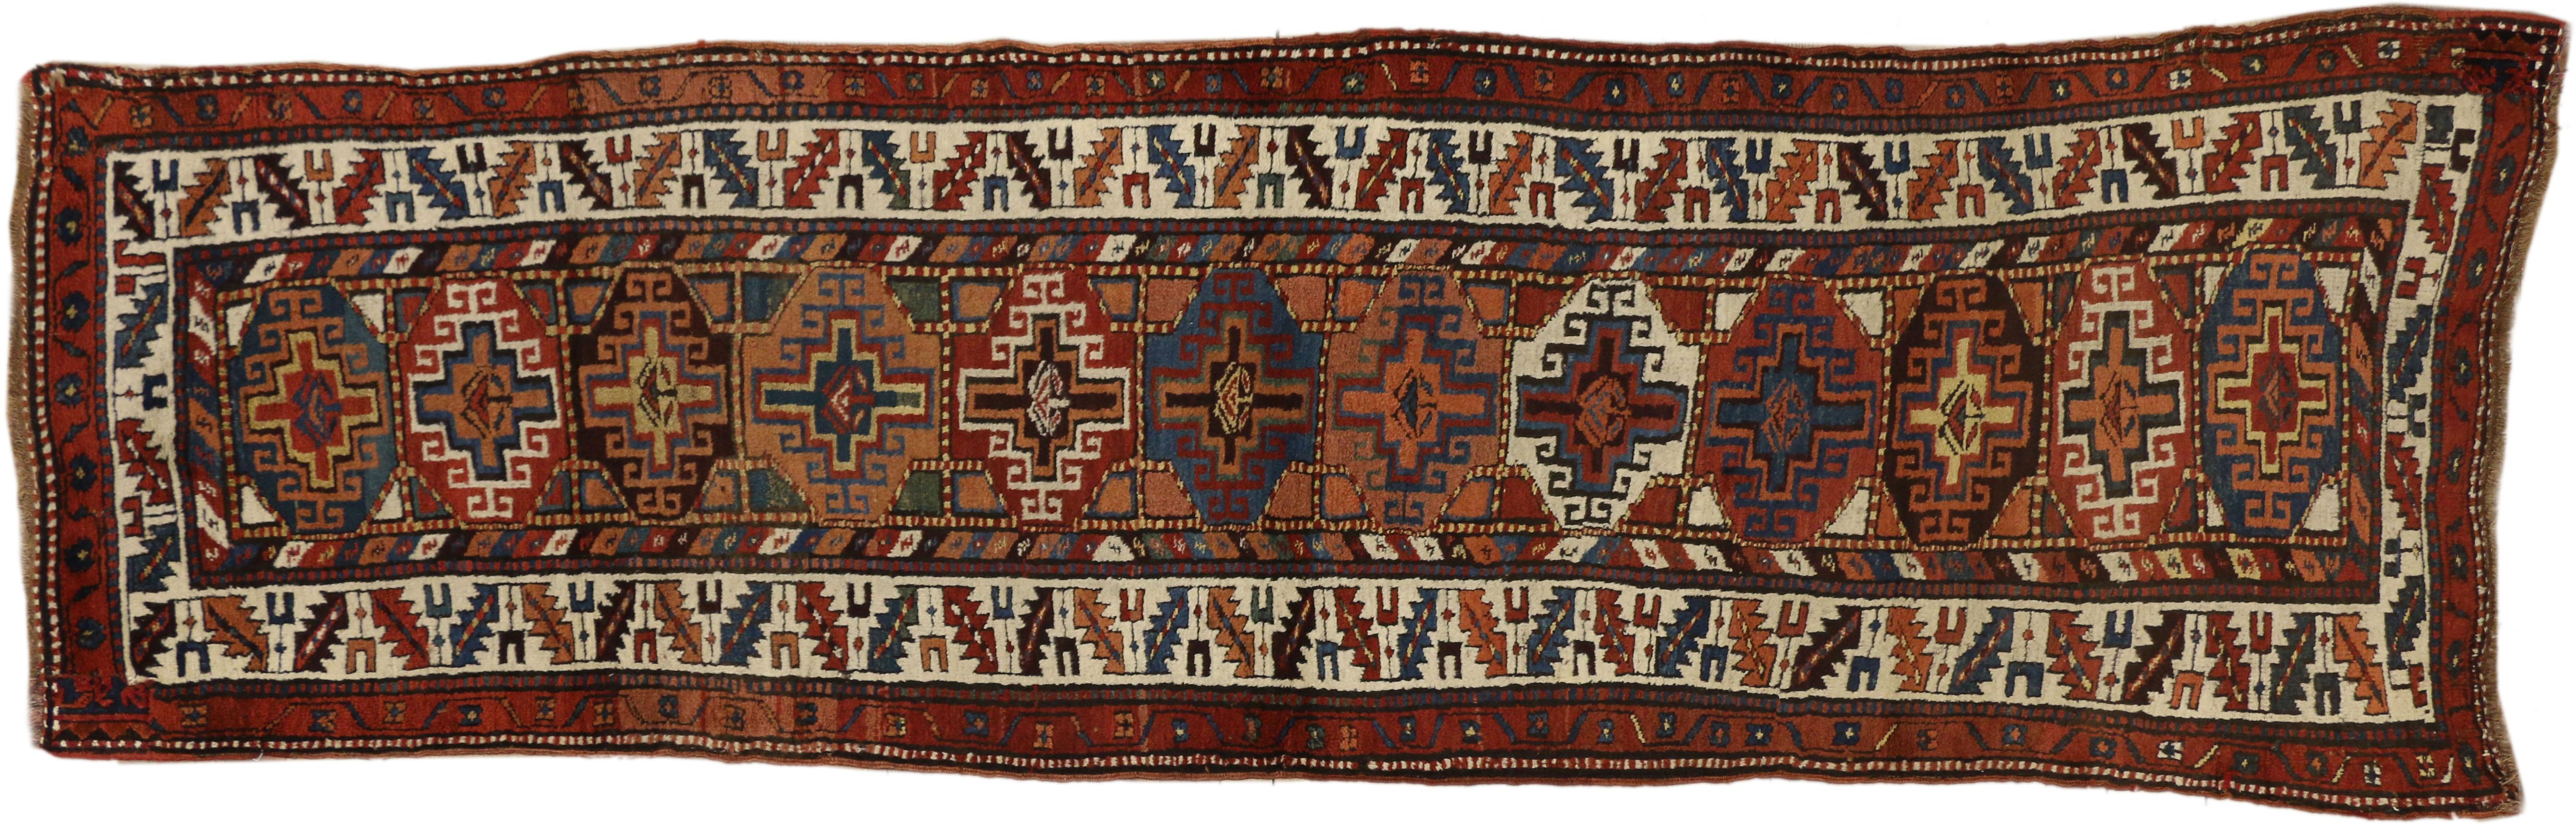 20th Century Antique Persian Kurdish Rug with Nomadic Raconteur Style, Hallway Runner For Sale